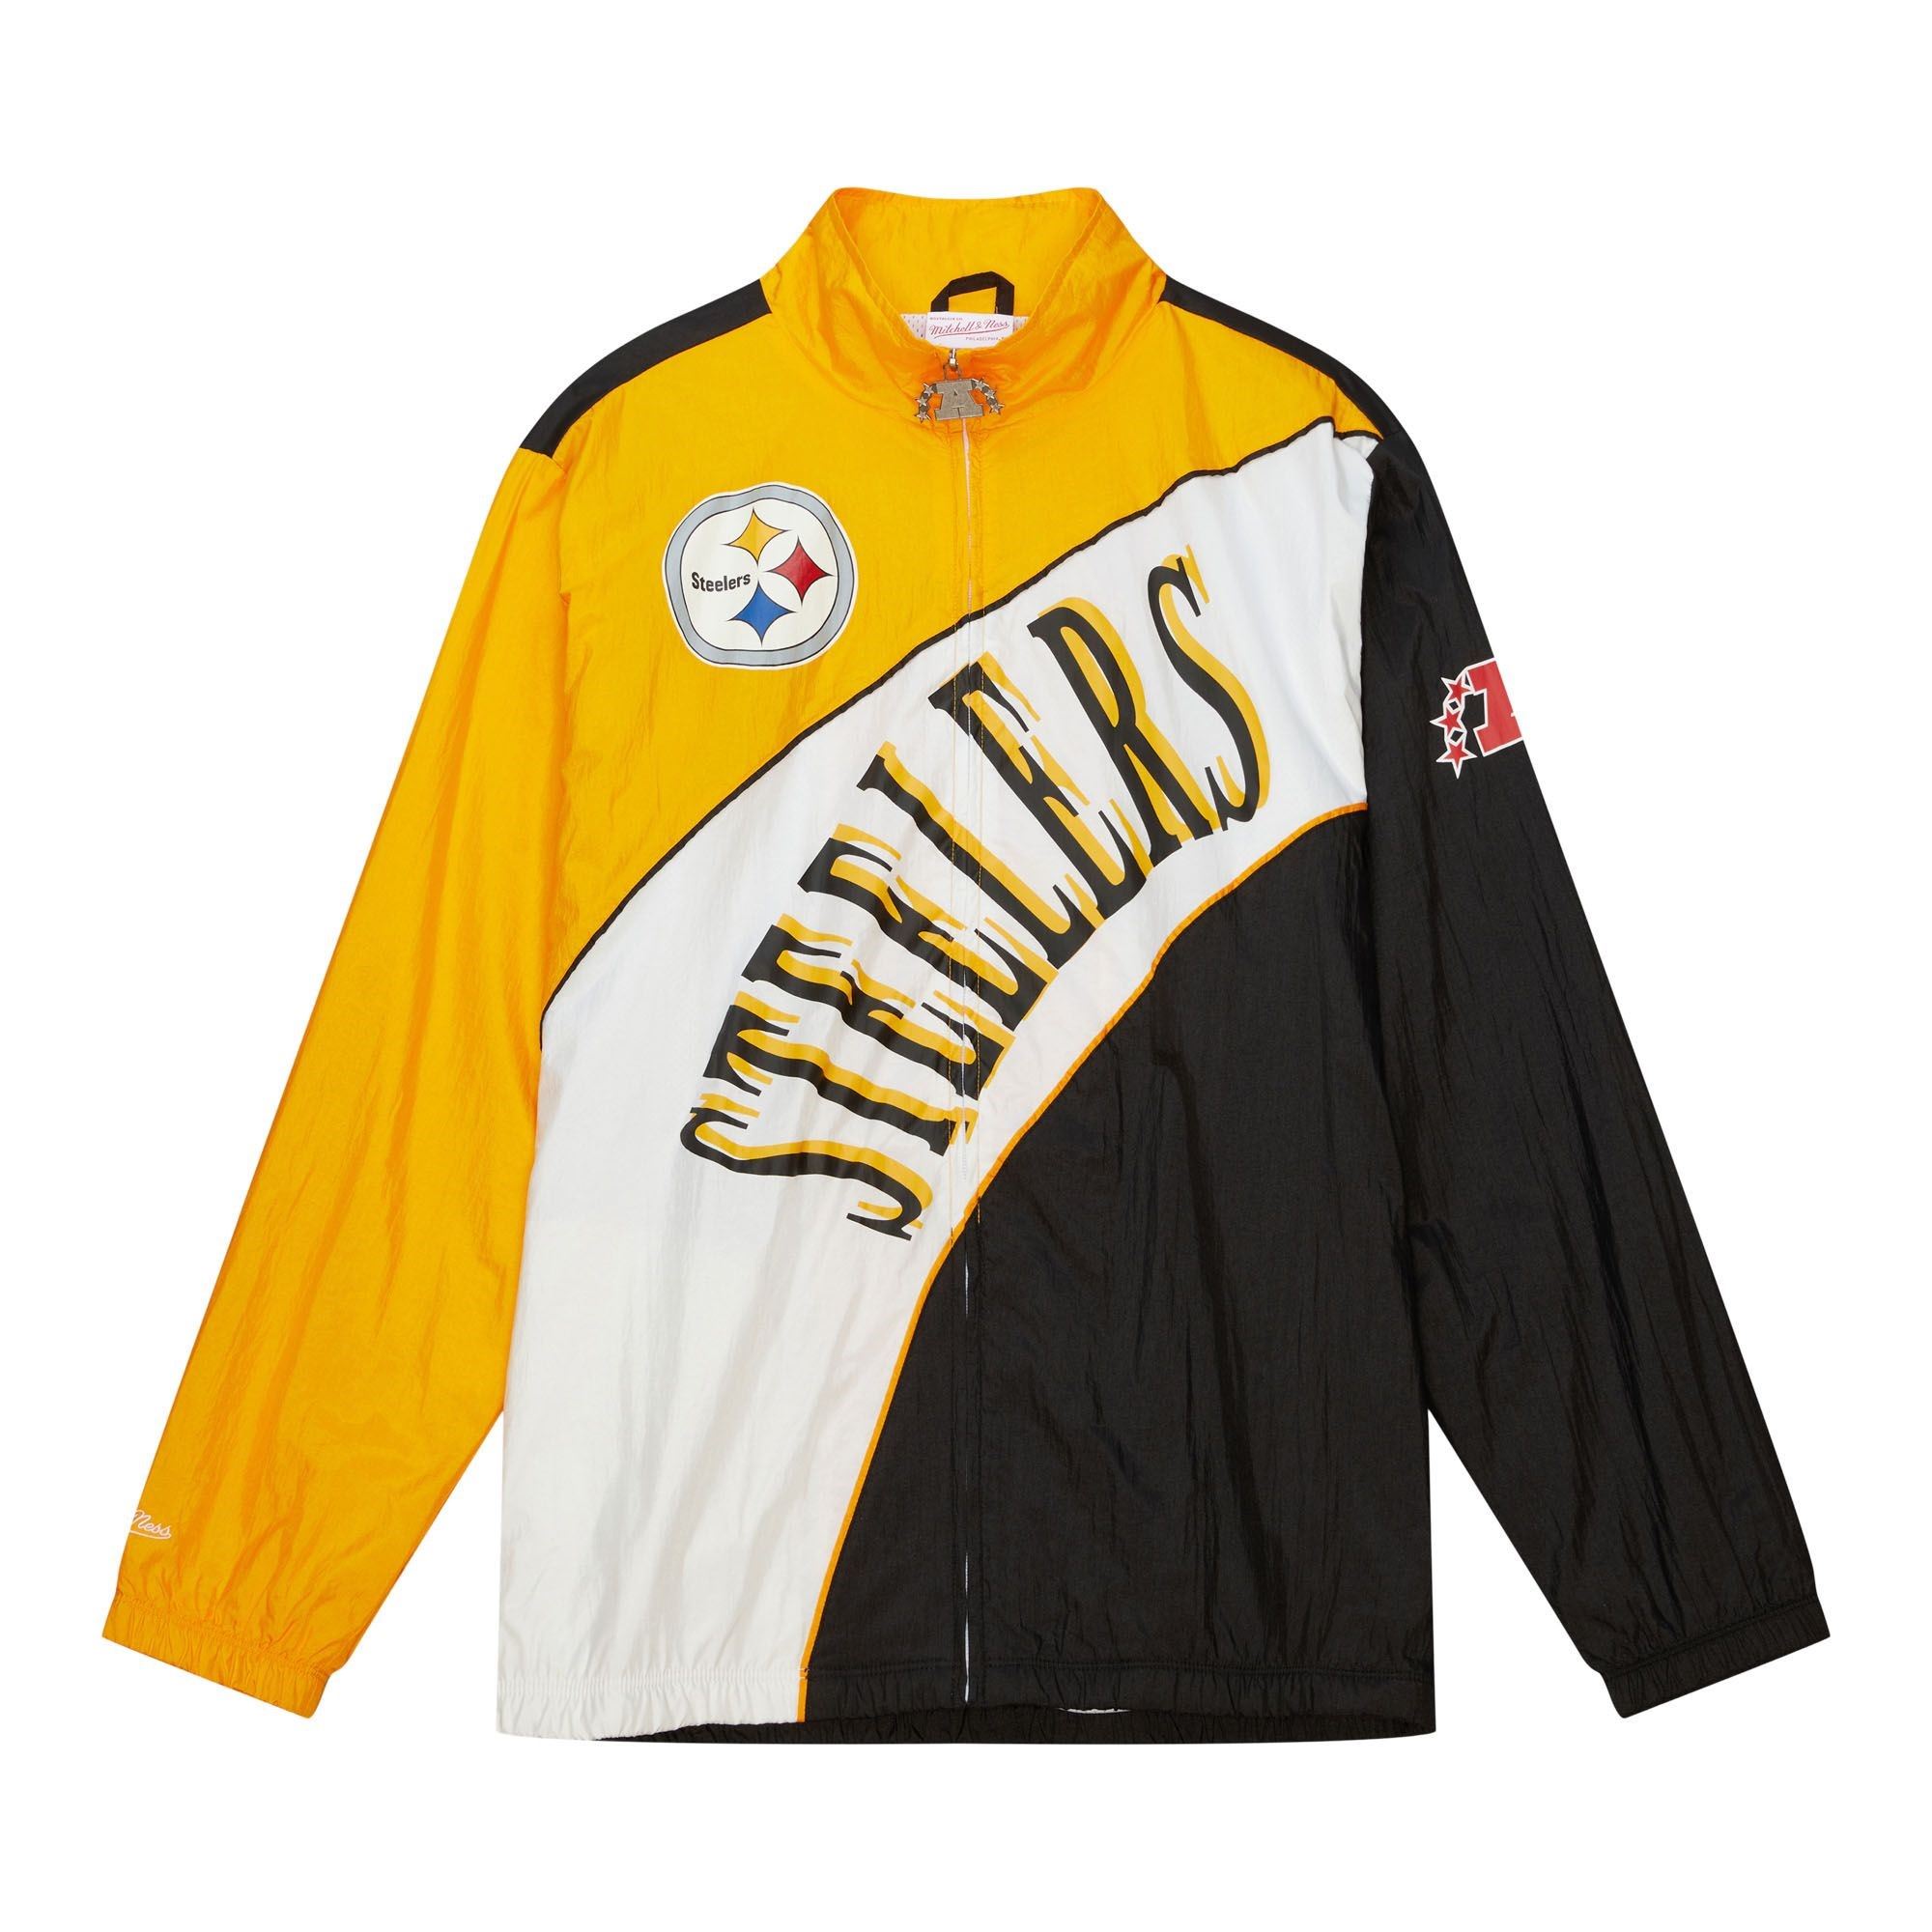 Pittsburgh Steelers NFL Arched Retro Lined Windbreaker Black Yellow Jacke Mitchell & Ness